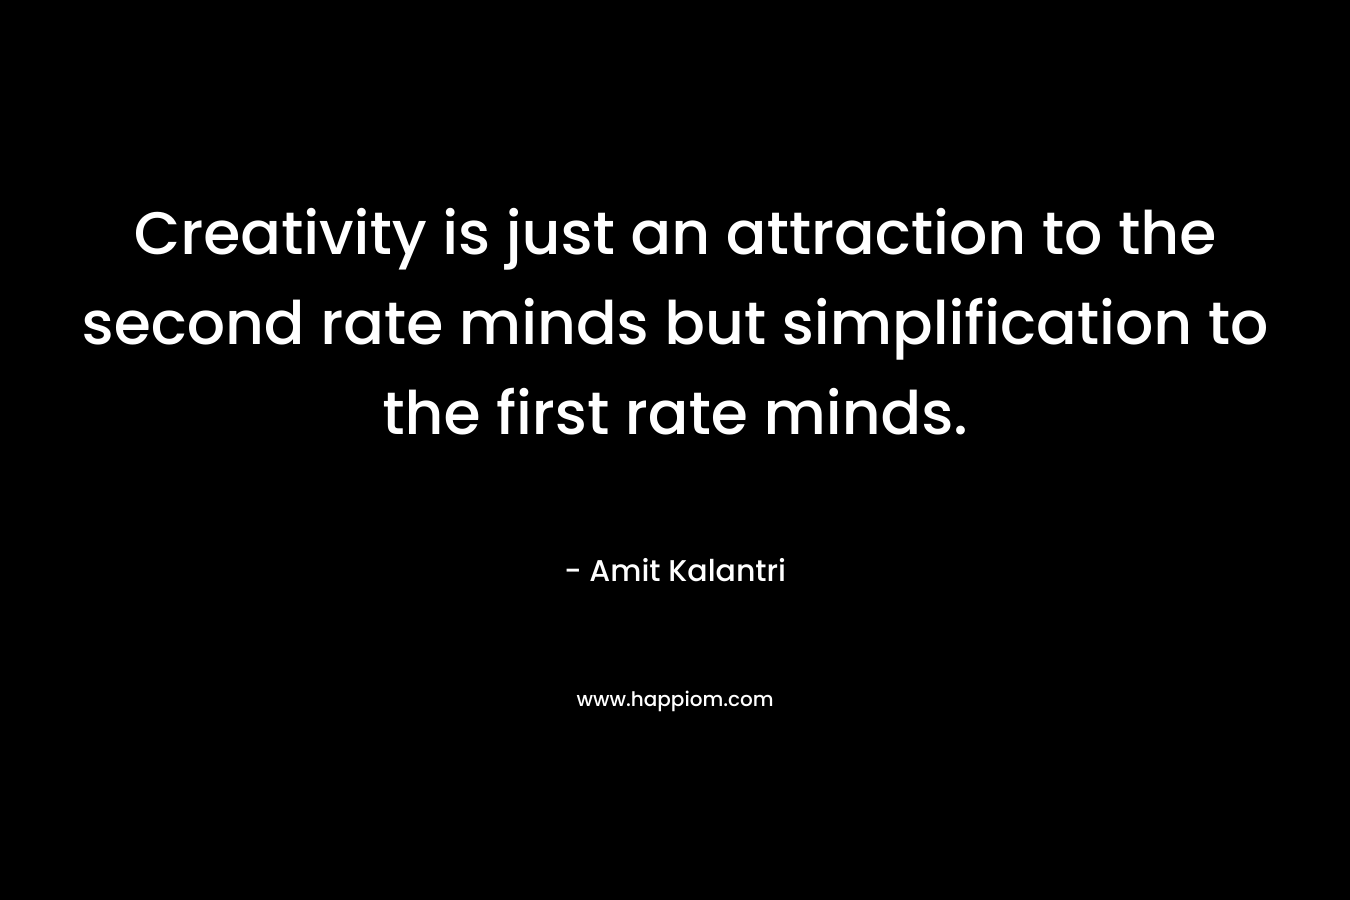 Creativity is just an attraction to the second rate minds but simplification to the first rate minds.